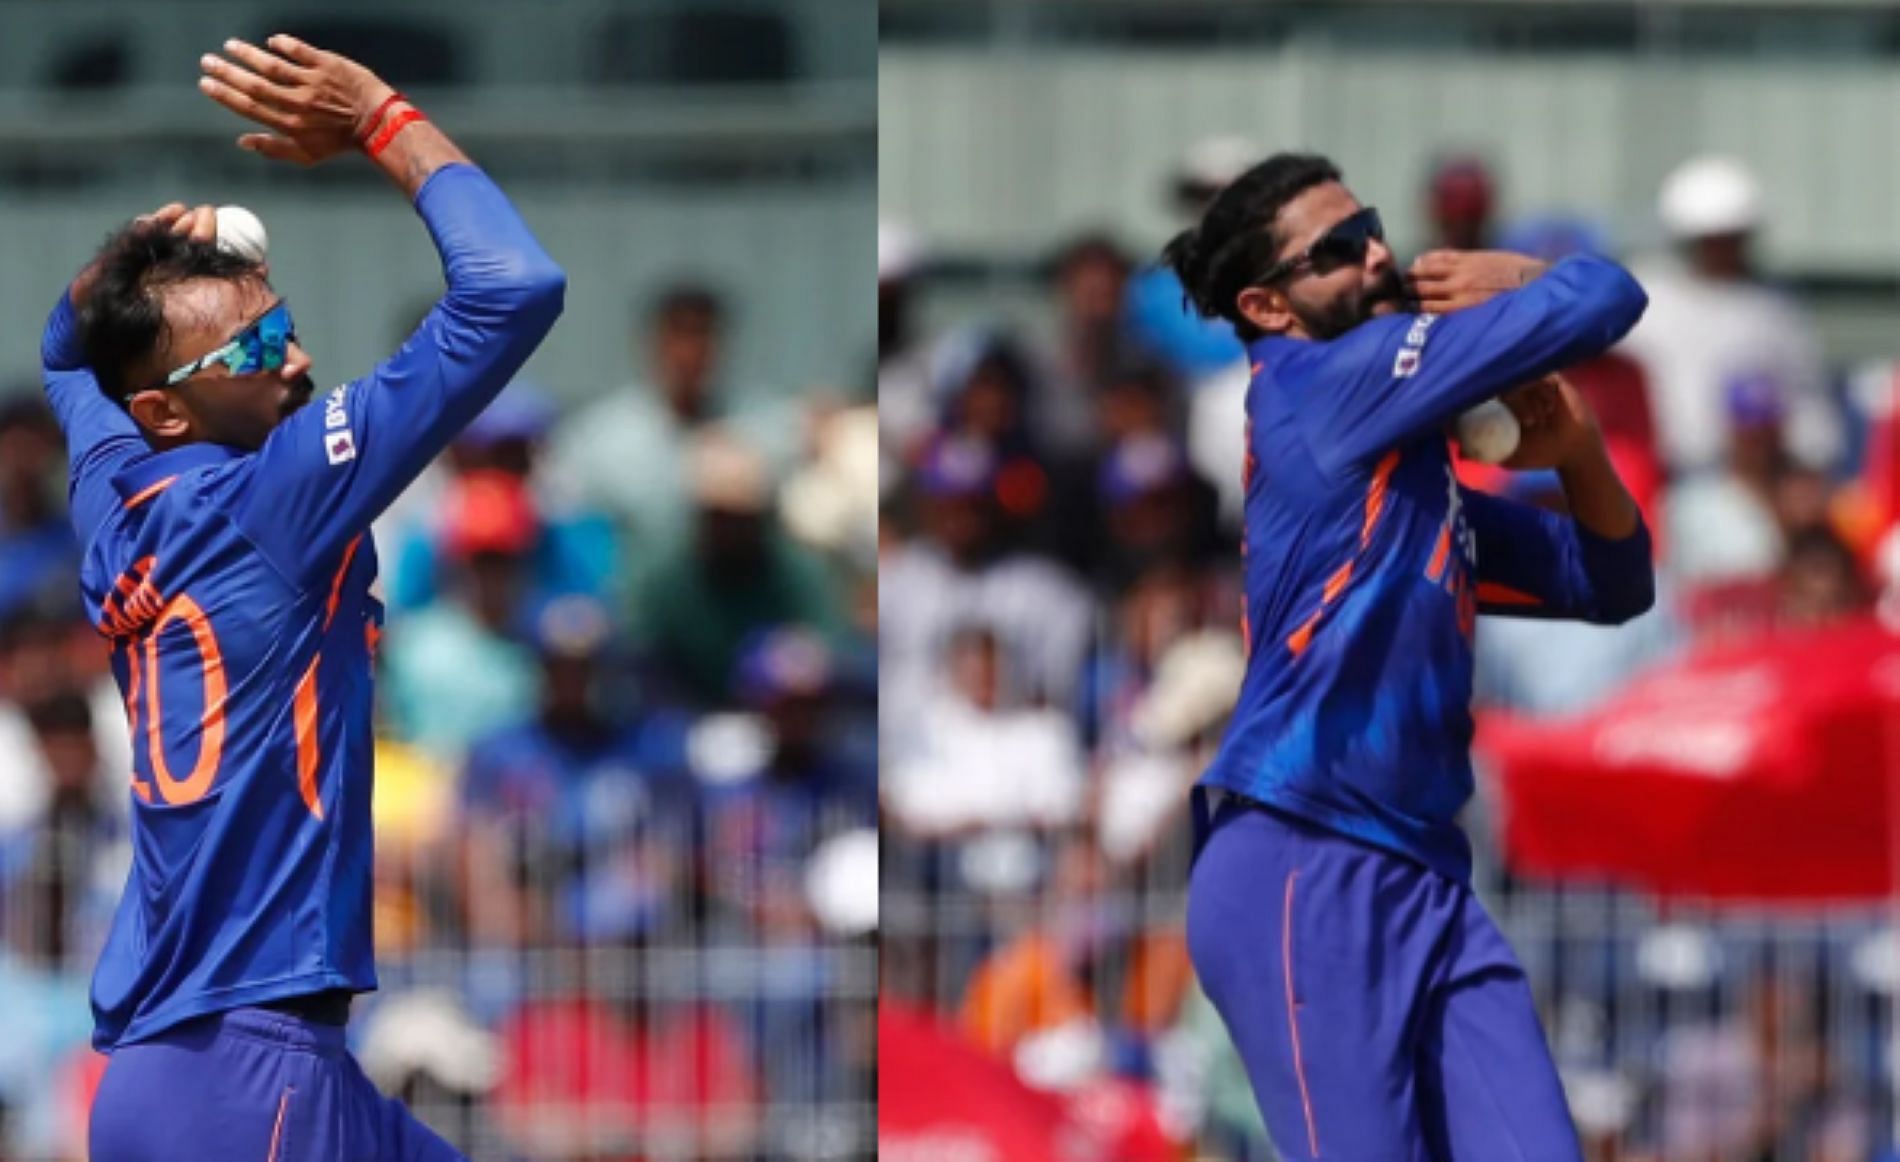 It could come down to a battle of the left-arm spinners for one spot in the Indian T20I squad